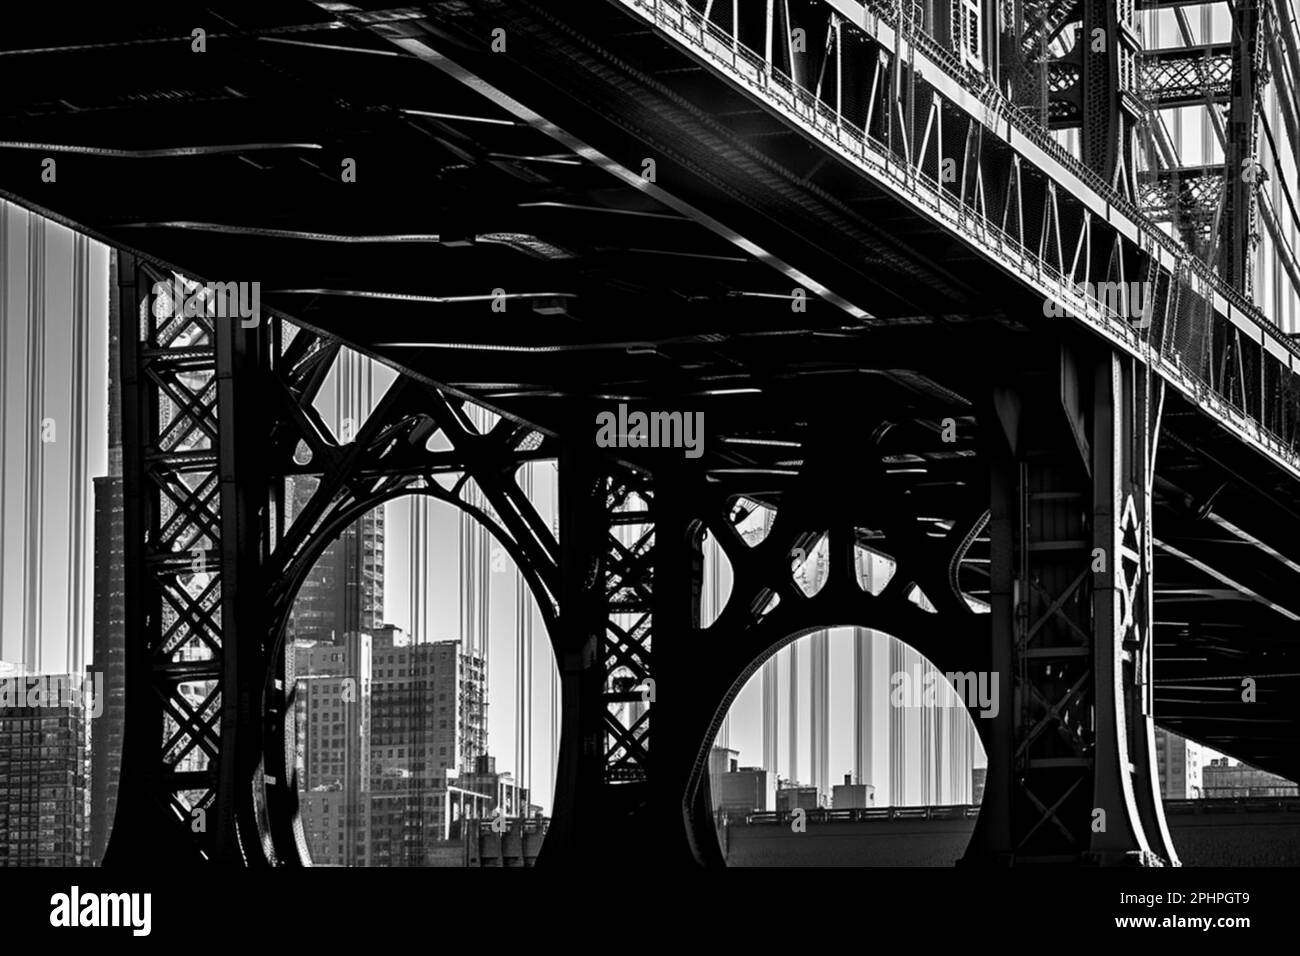 Abstract Bridge close up architectural detail monochrome background ...